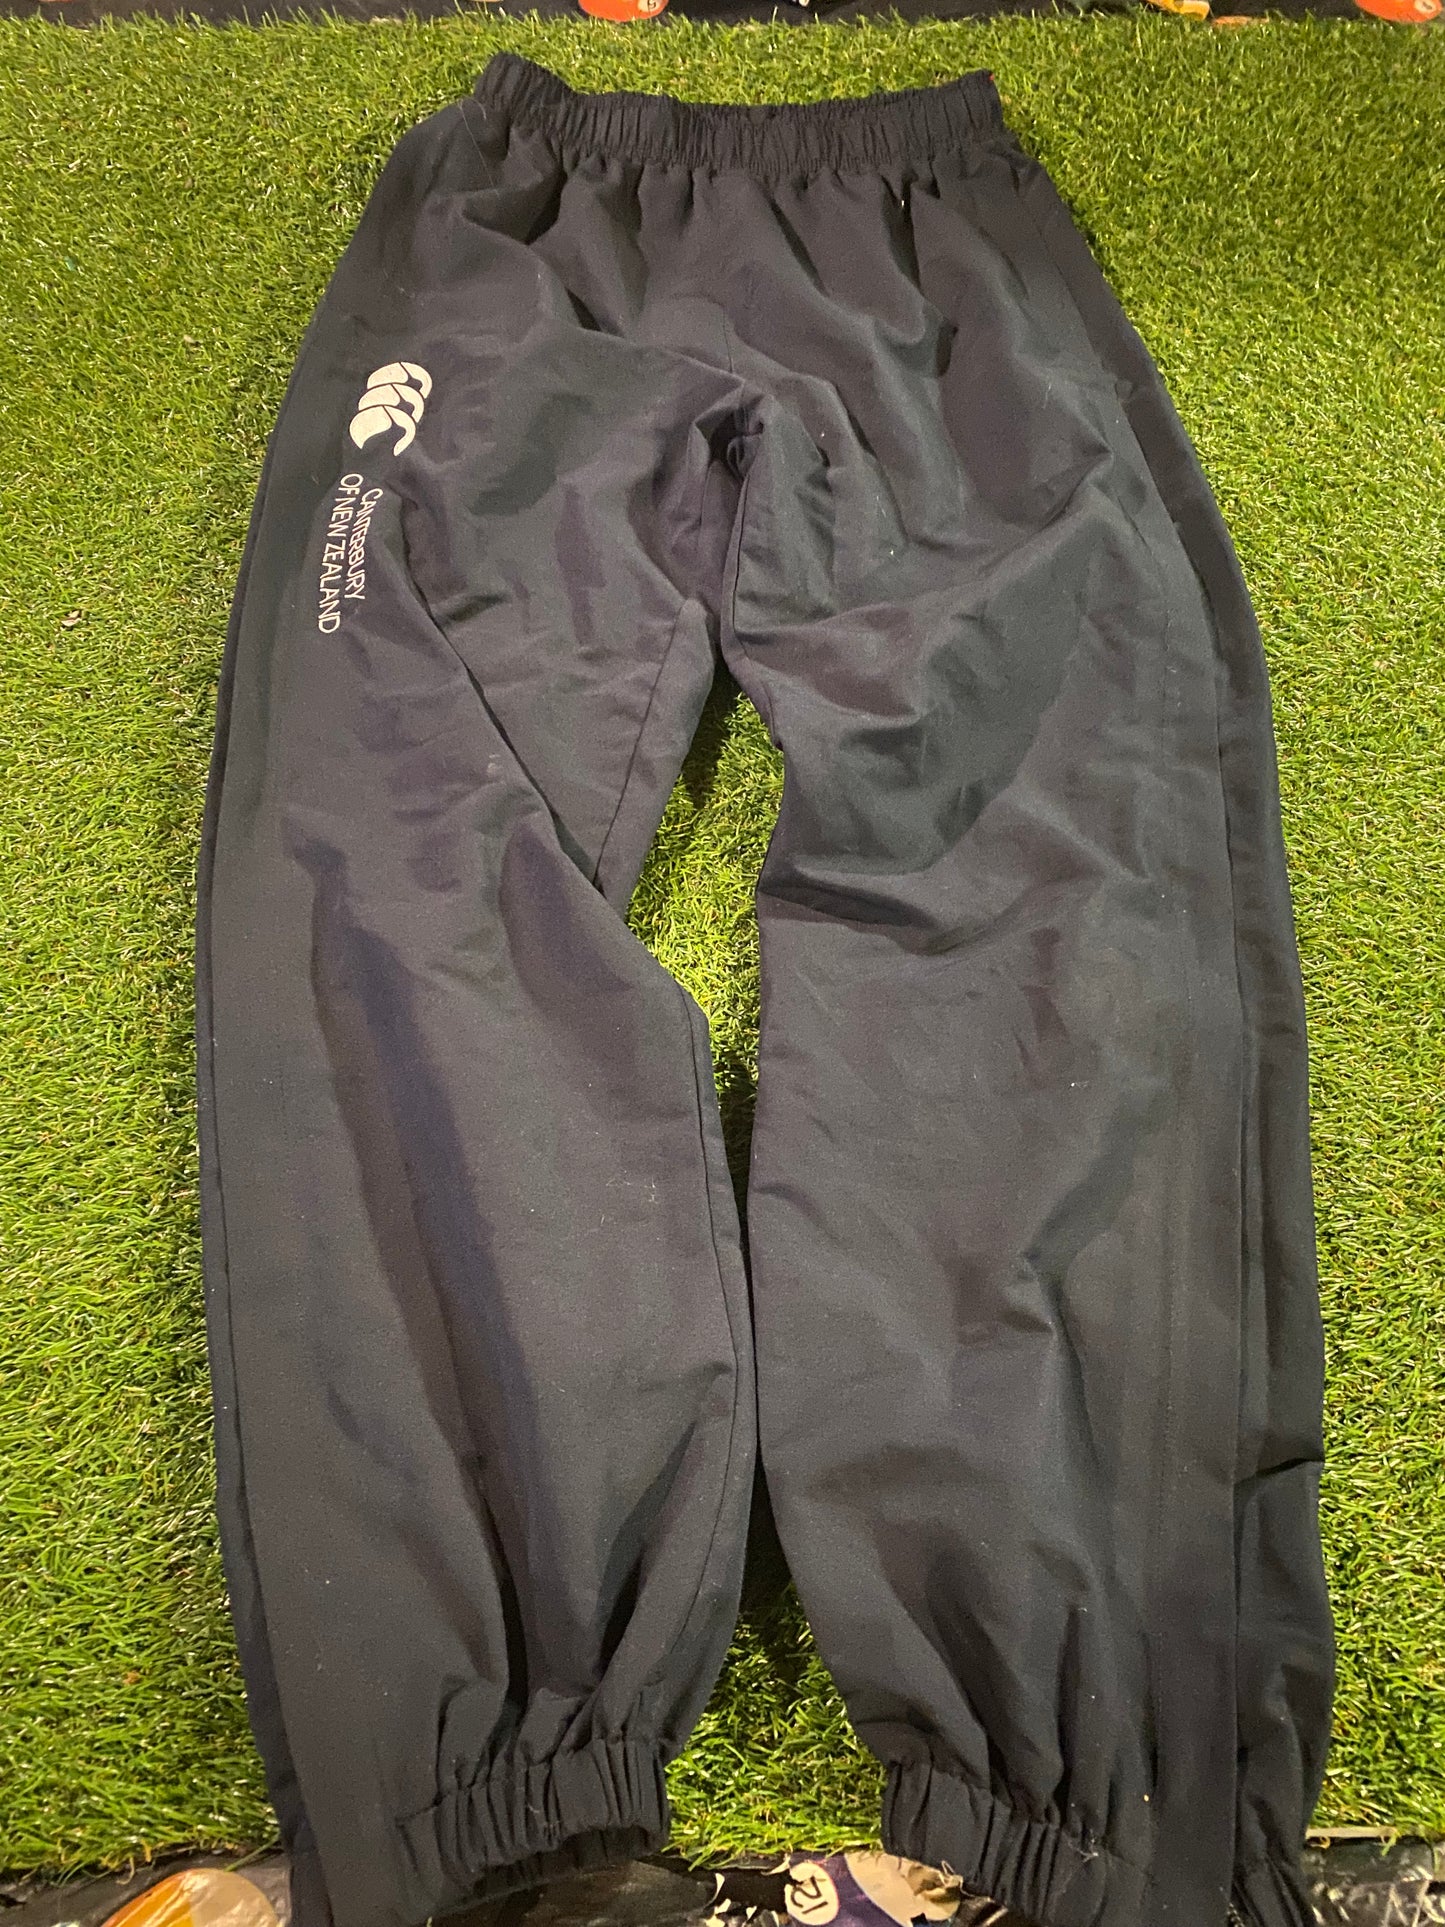 Rugby Pant: Canterbury CCC Uglies Open Hem, Pocketed, Lined Stadium Pant -  Black or Navy - Canterbury USA